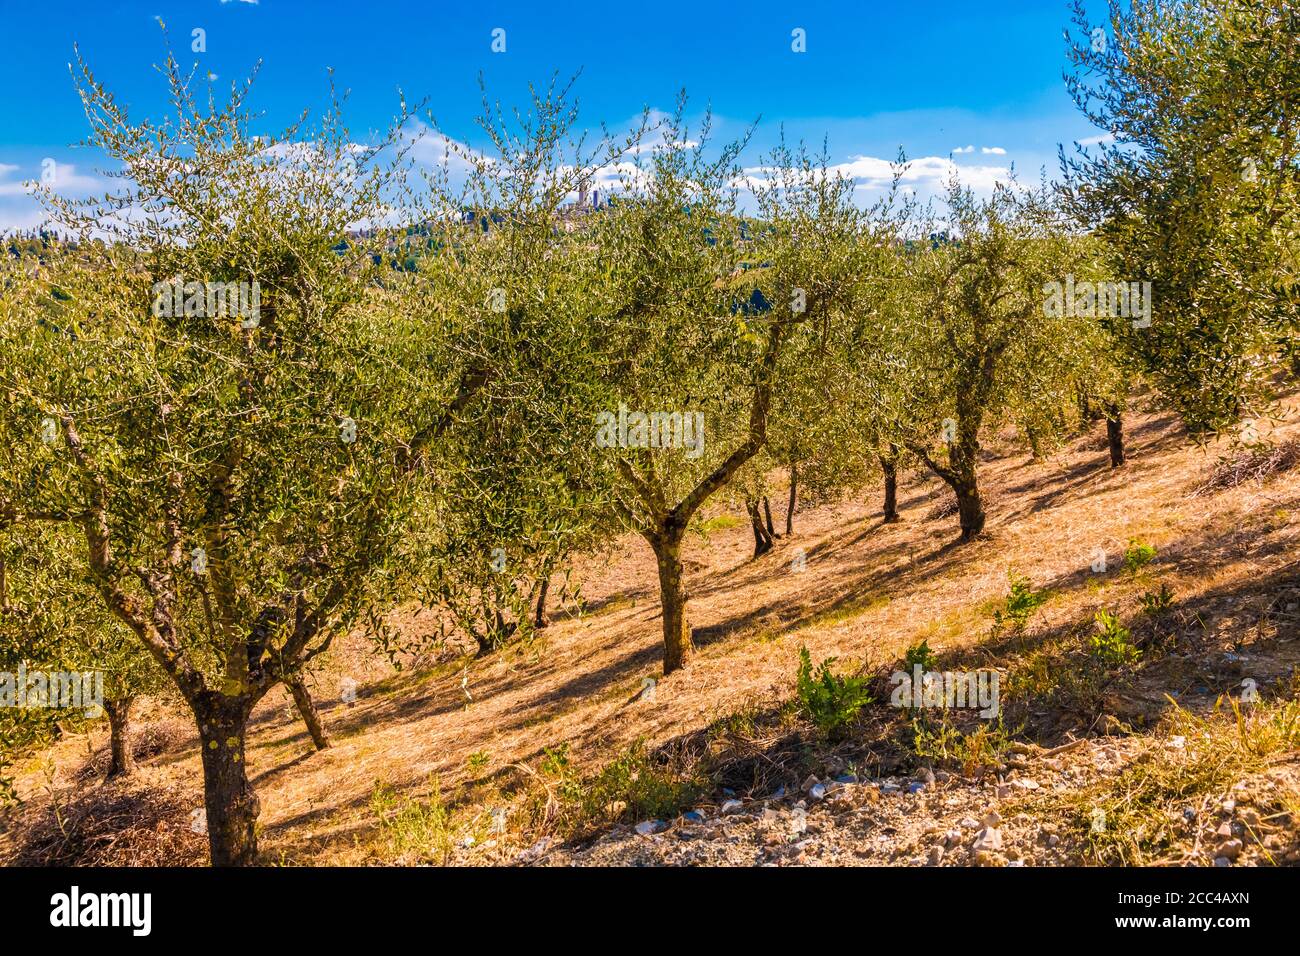 Lovely view of an olive tree orchard for oil production on a hot sunny day with a blue sky. The olive trees grow in a row on a slope in the... Stock Photo